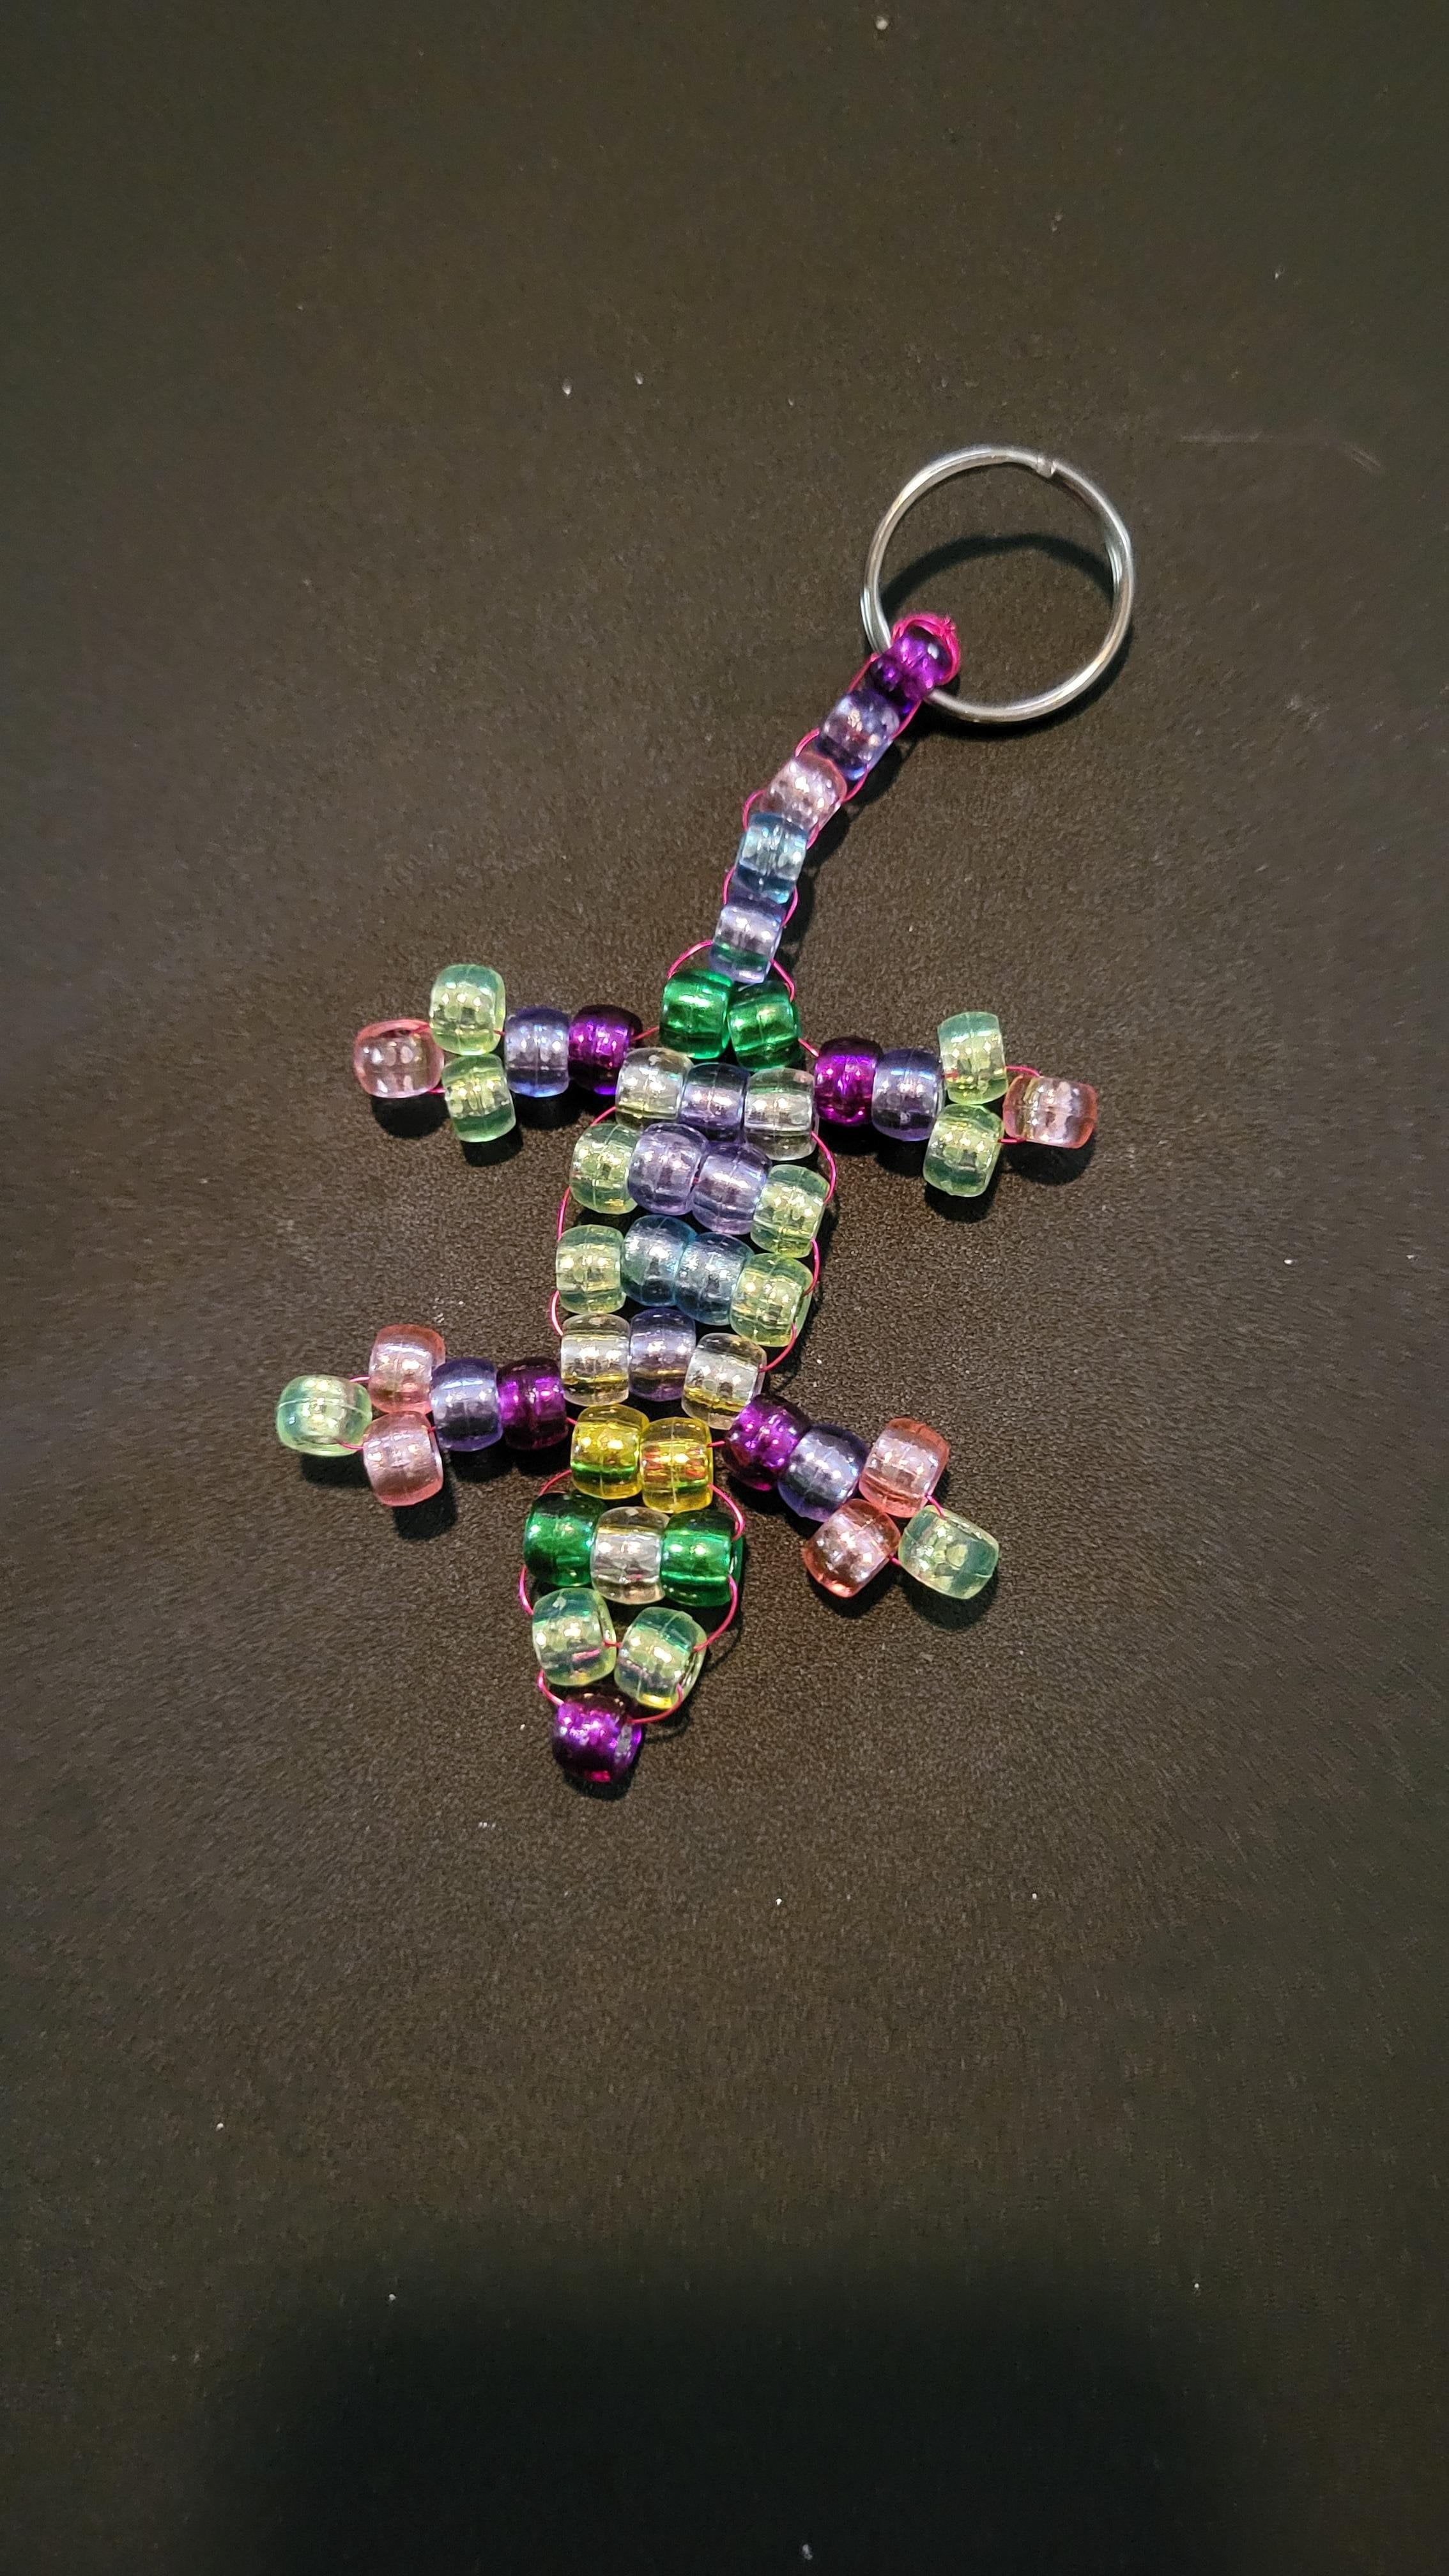 A plastic beaded keychain in the shape of a lizard